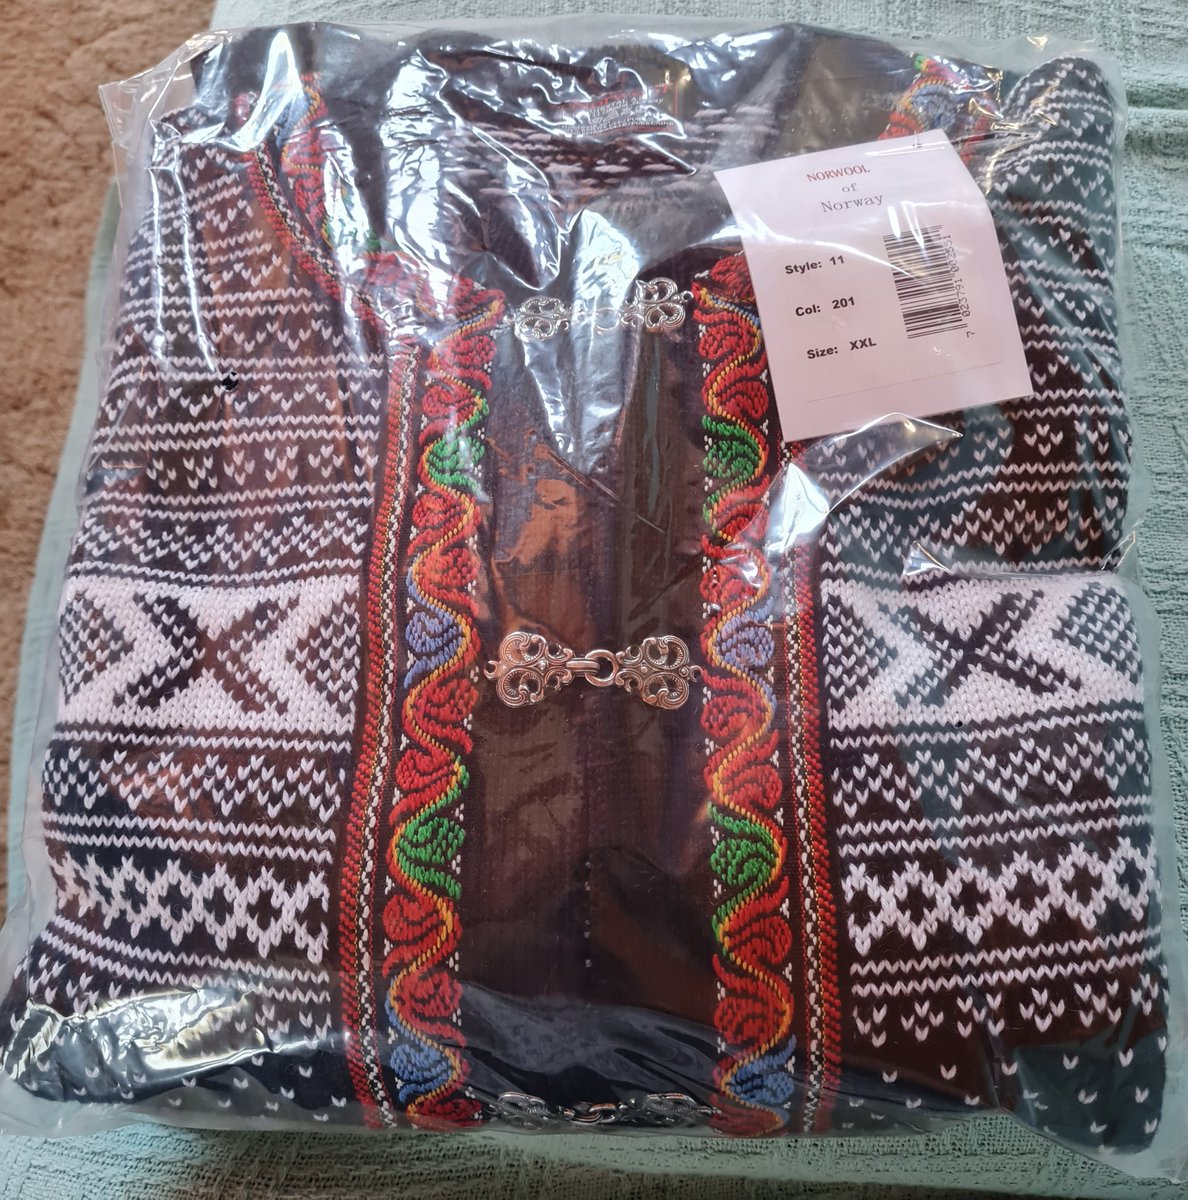 Guess who got Thor's Norwegian wool cardigan delivered today!
Hint: it was me & it looks amazing! https://t.co/Dg8a5sS5uL